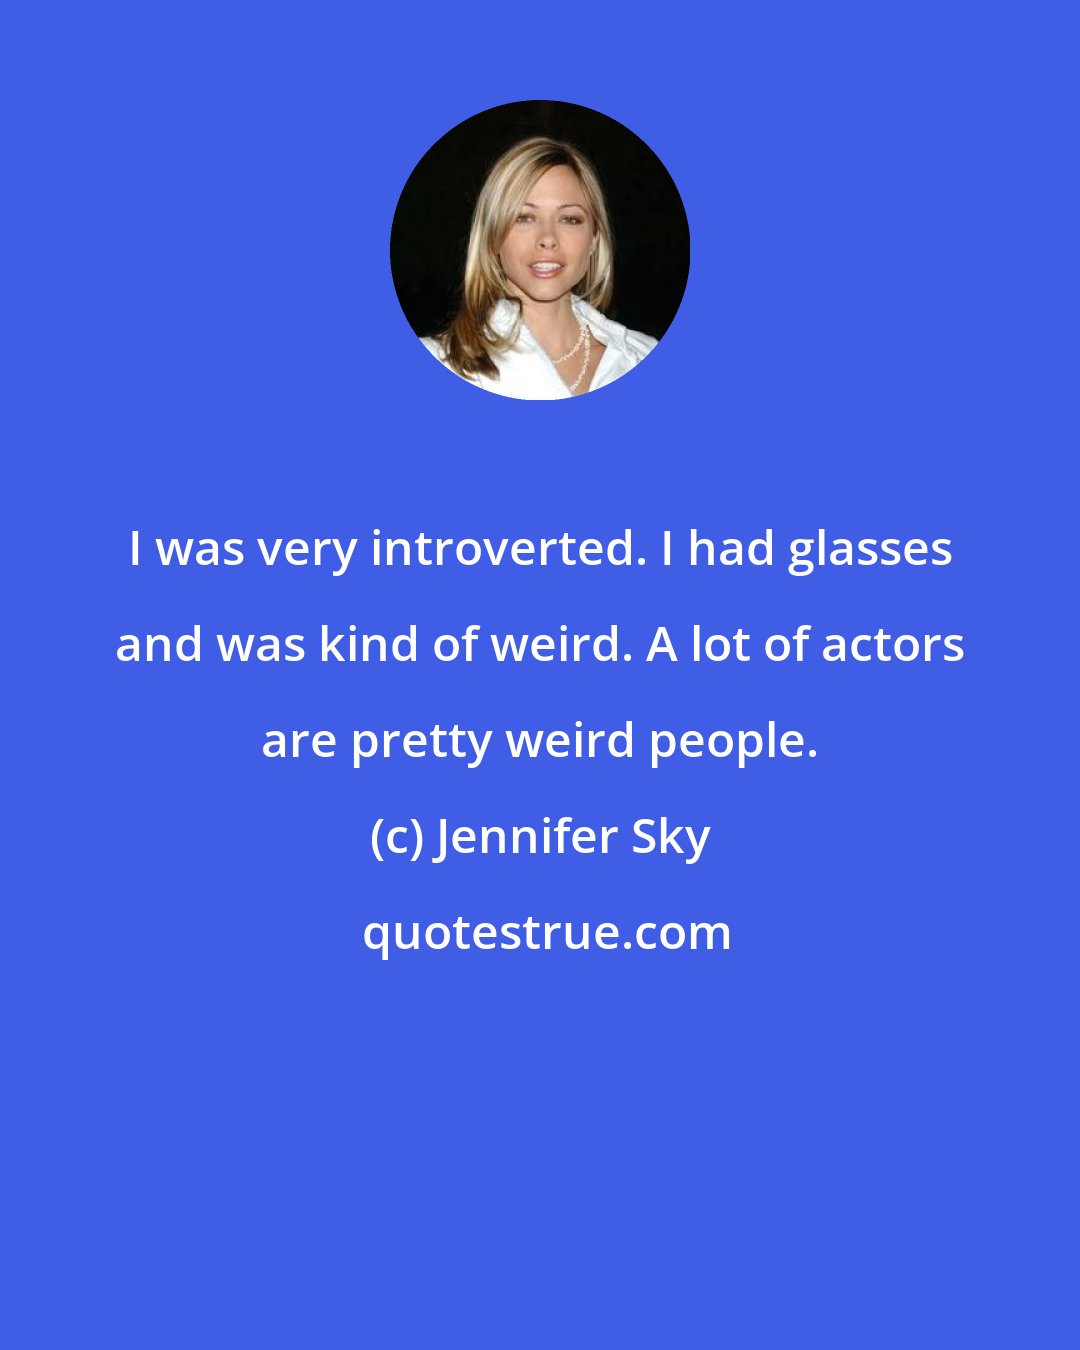 Jennifer Sky: I was very introverted. I had glasses and was kind of weird. A lot of actors are pretty weird people.